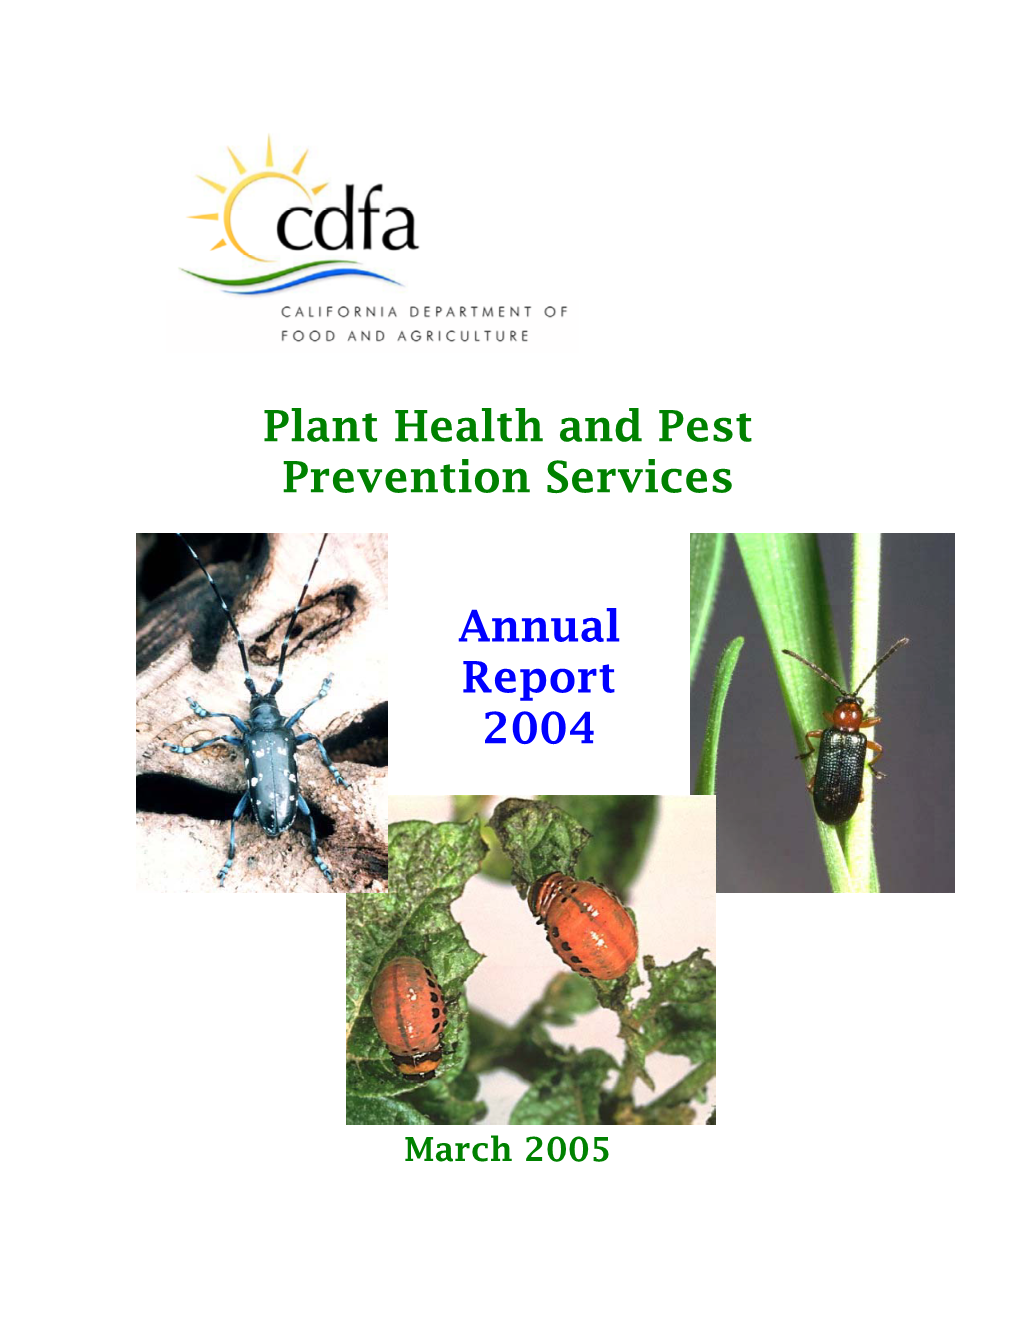 Annual Report 2004 Plant Health and Pest Prevention Services